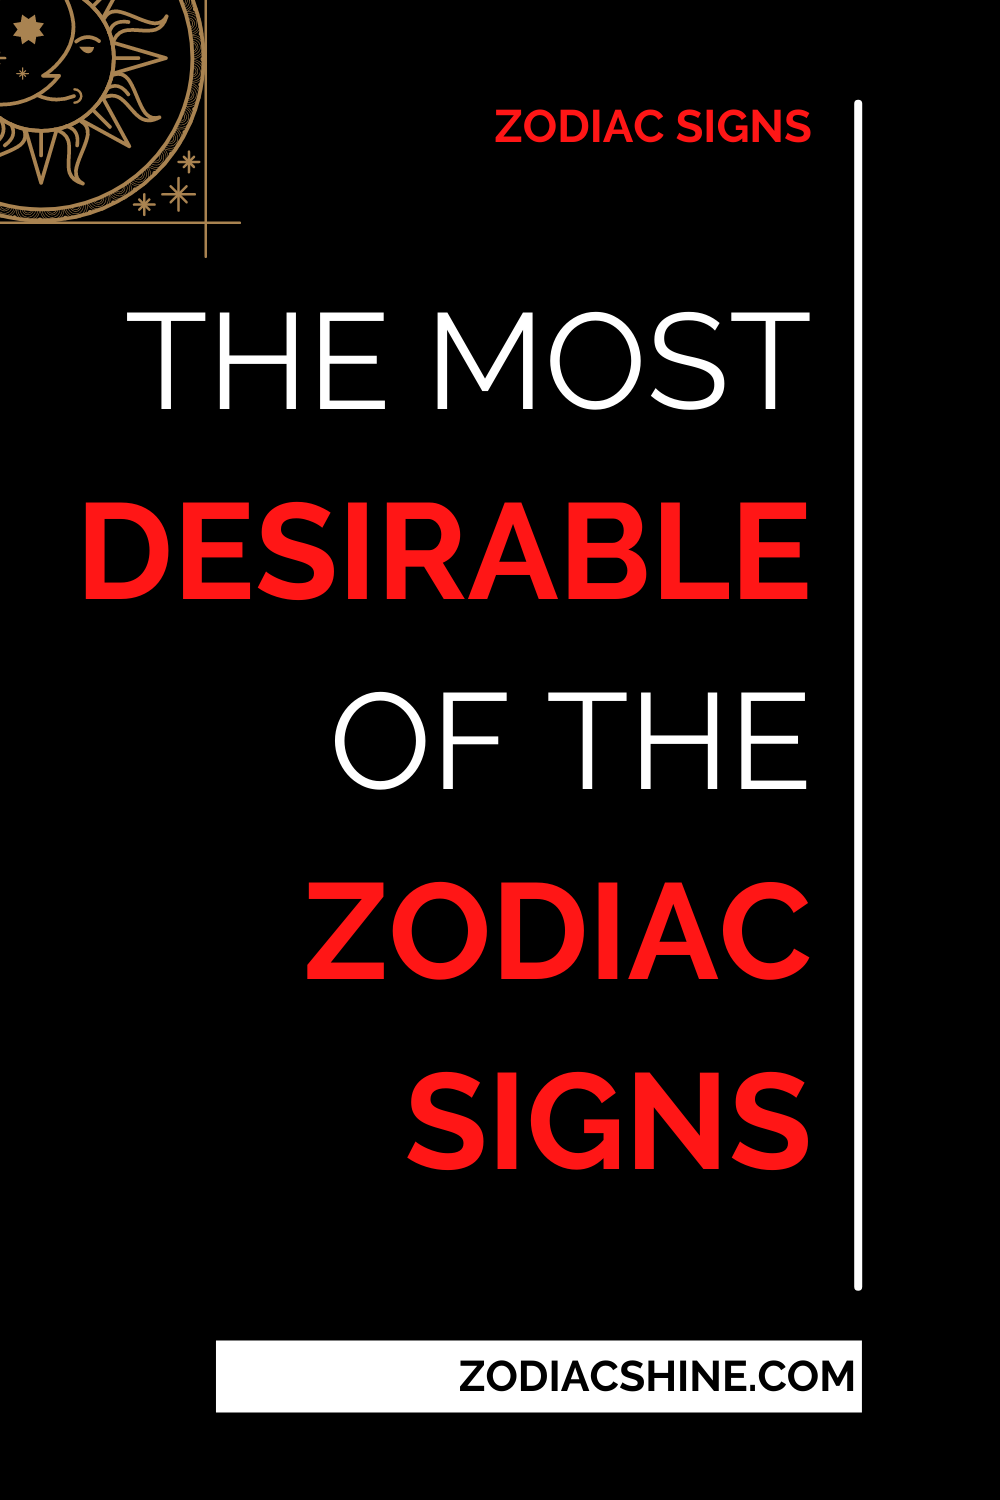 The Most Desirable Of The Zodiac Signs